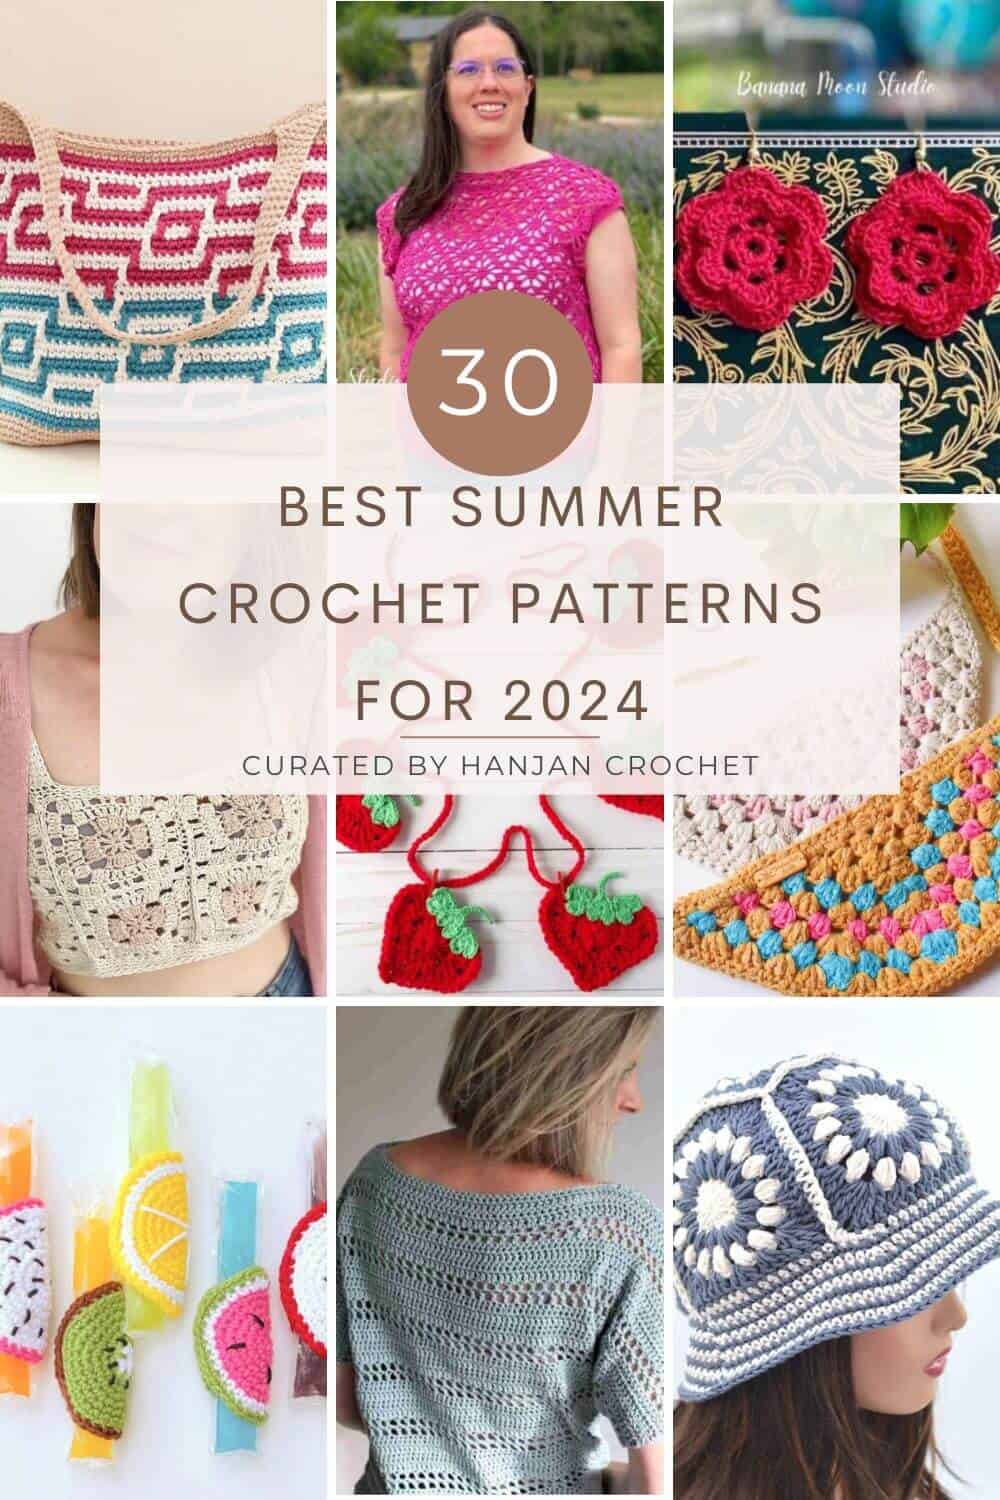 A pin image highlighting some of the 30 best summer crochet patterns for 2024